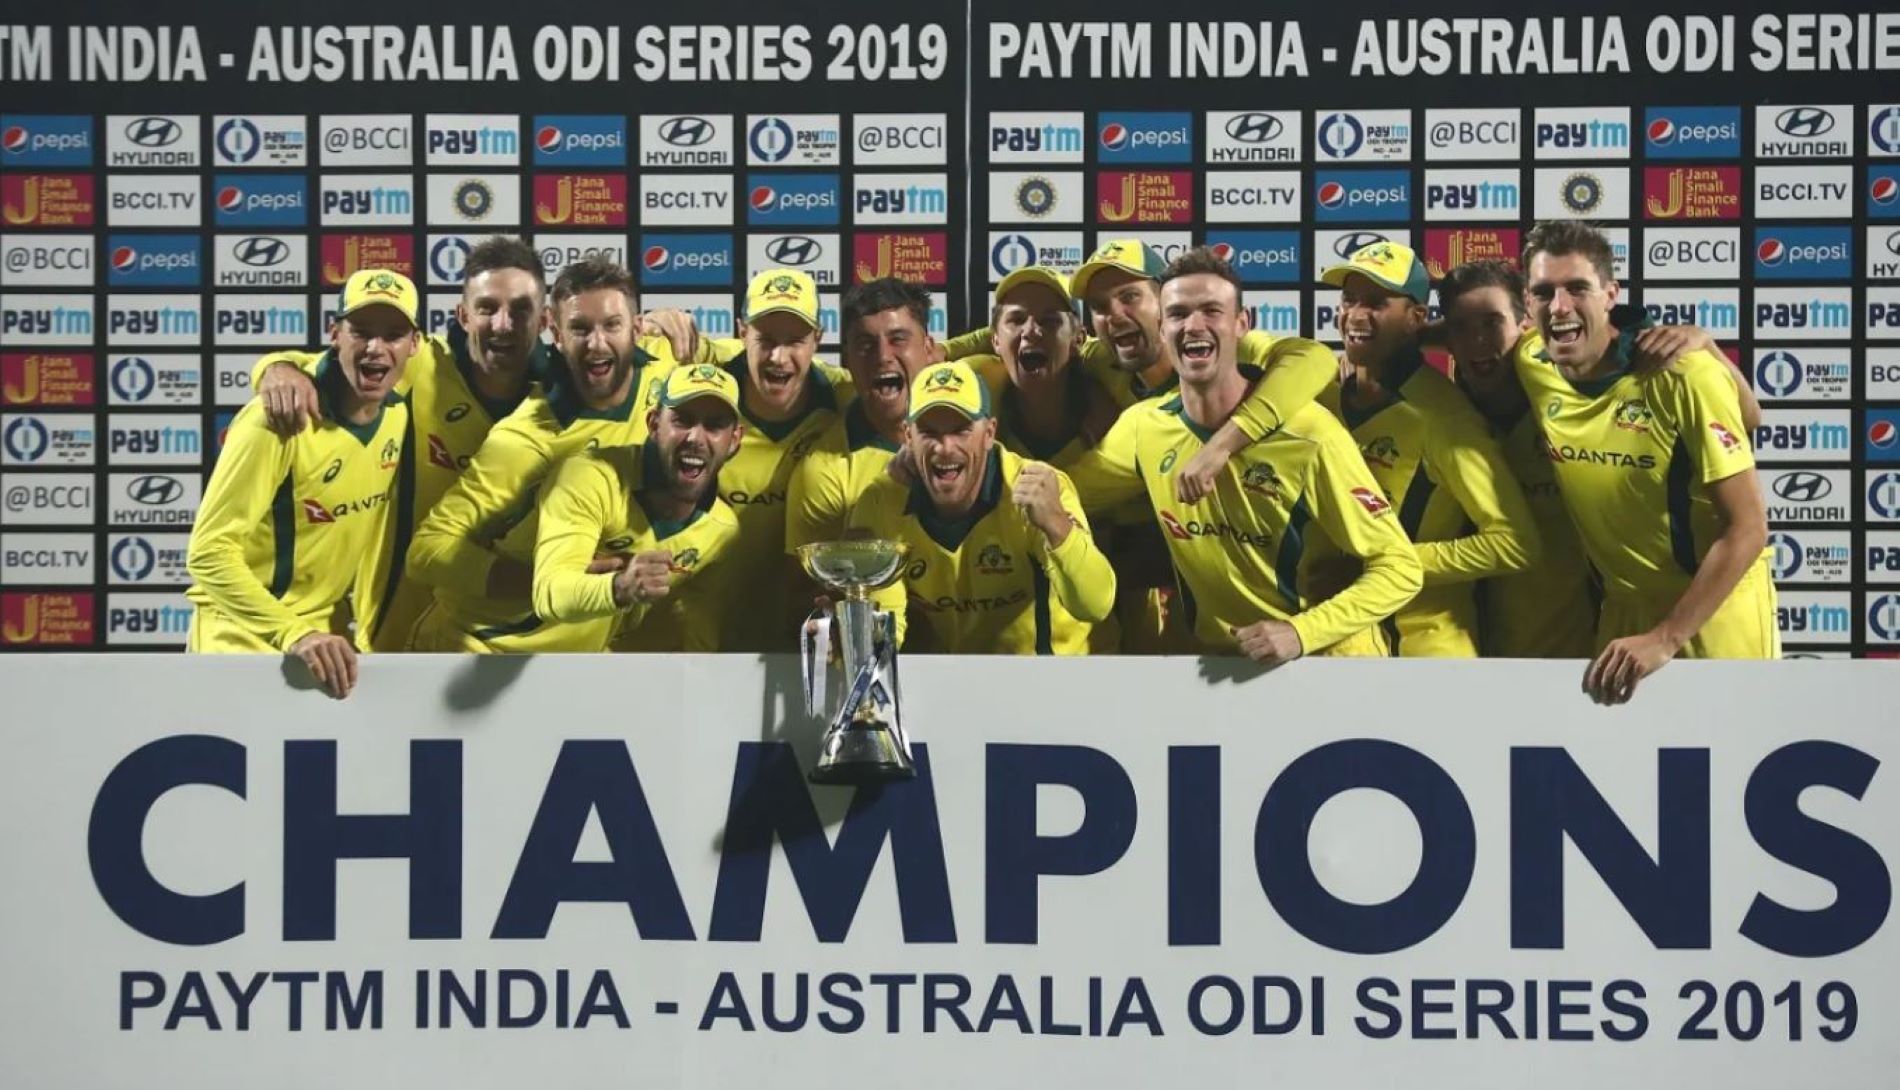 Australia displayed their incredible fighting qualities to pull off the impossible in India.